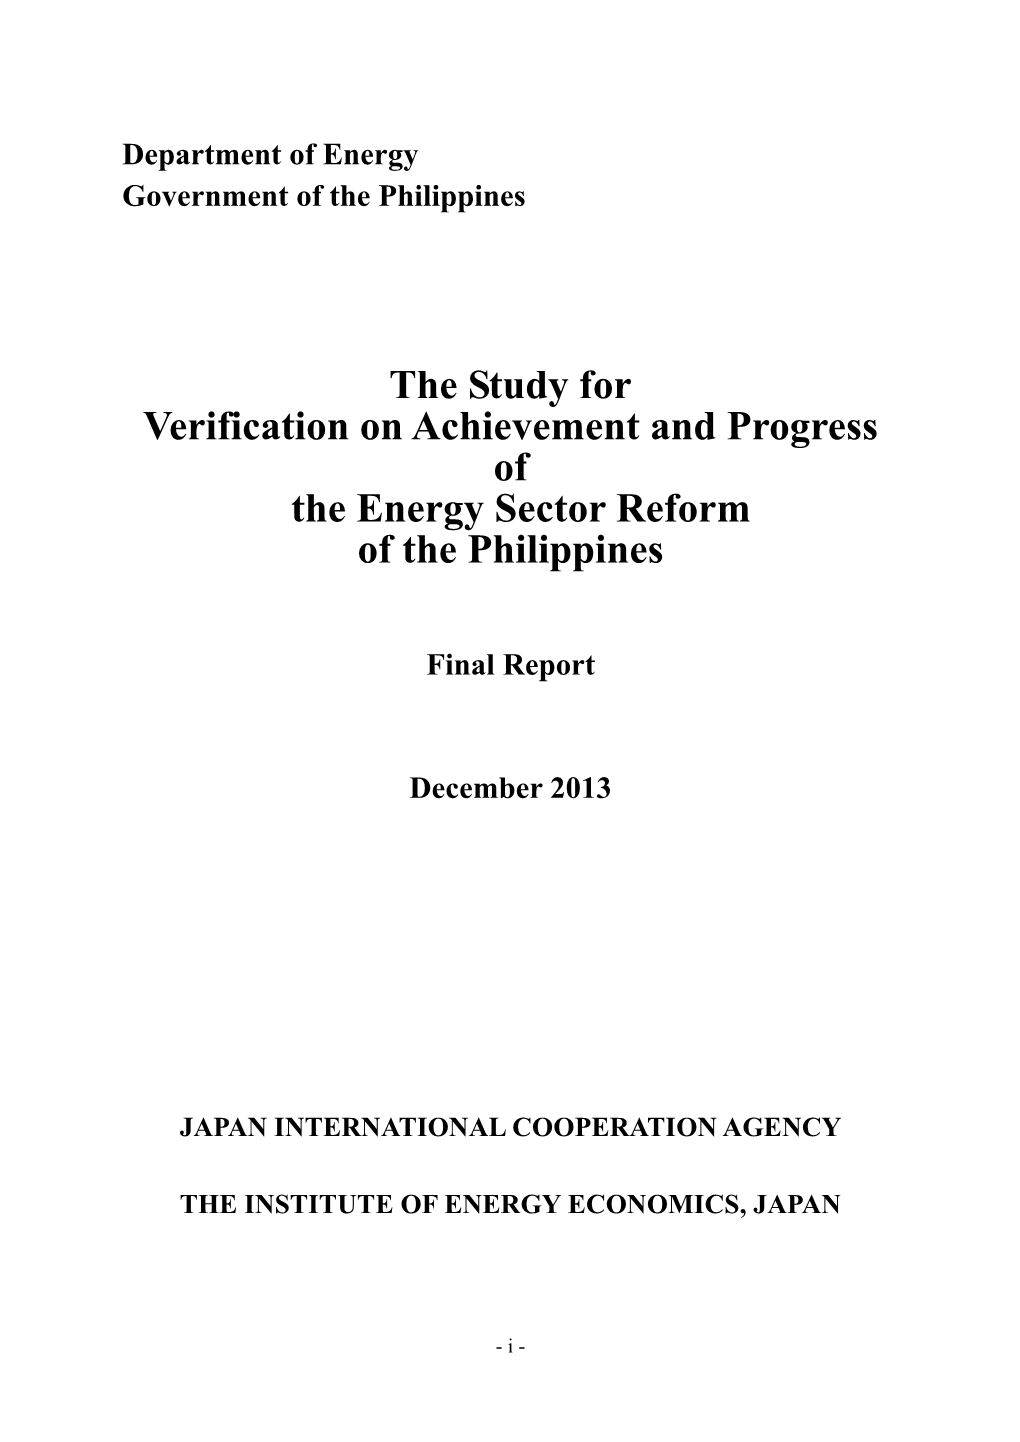 The Study for Verification on Achievement and Progress of the Energy Sector Reform of the Philippines